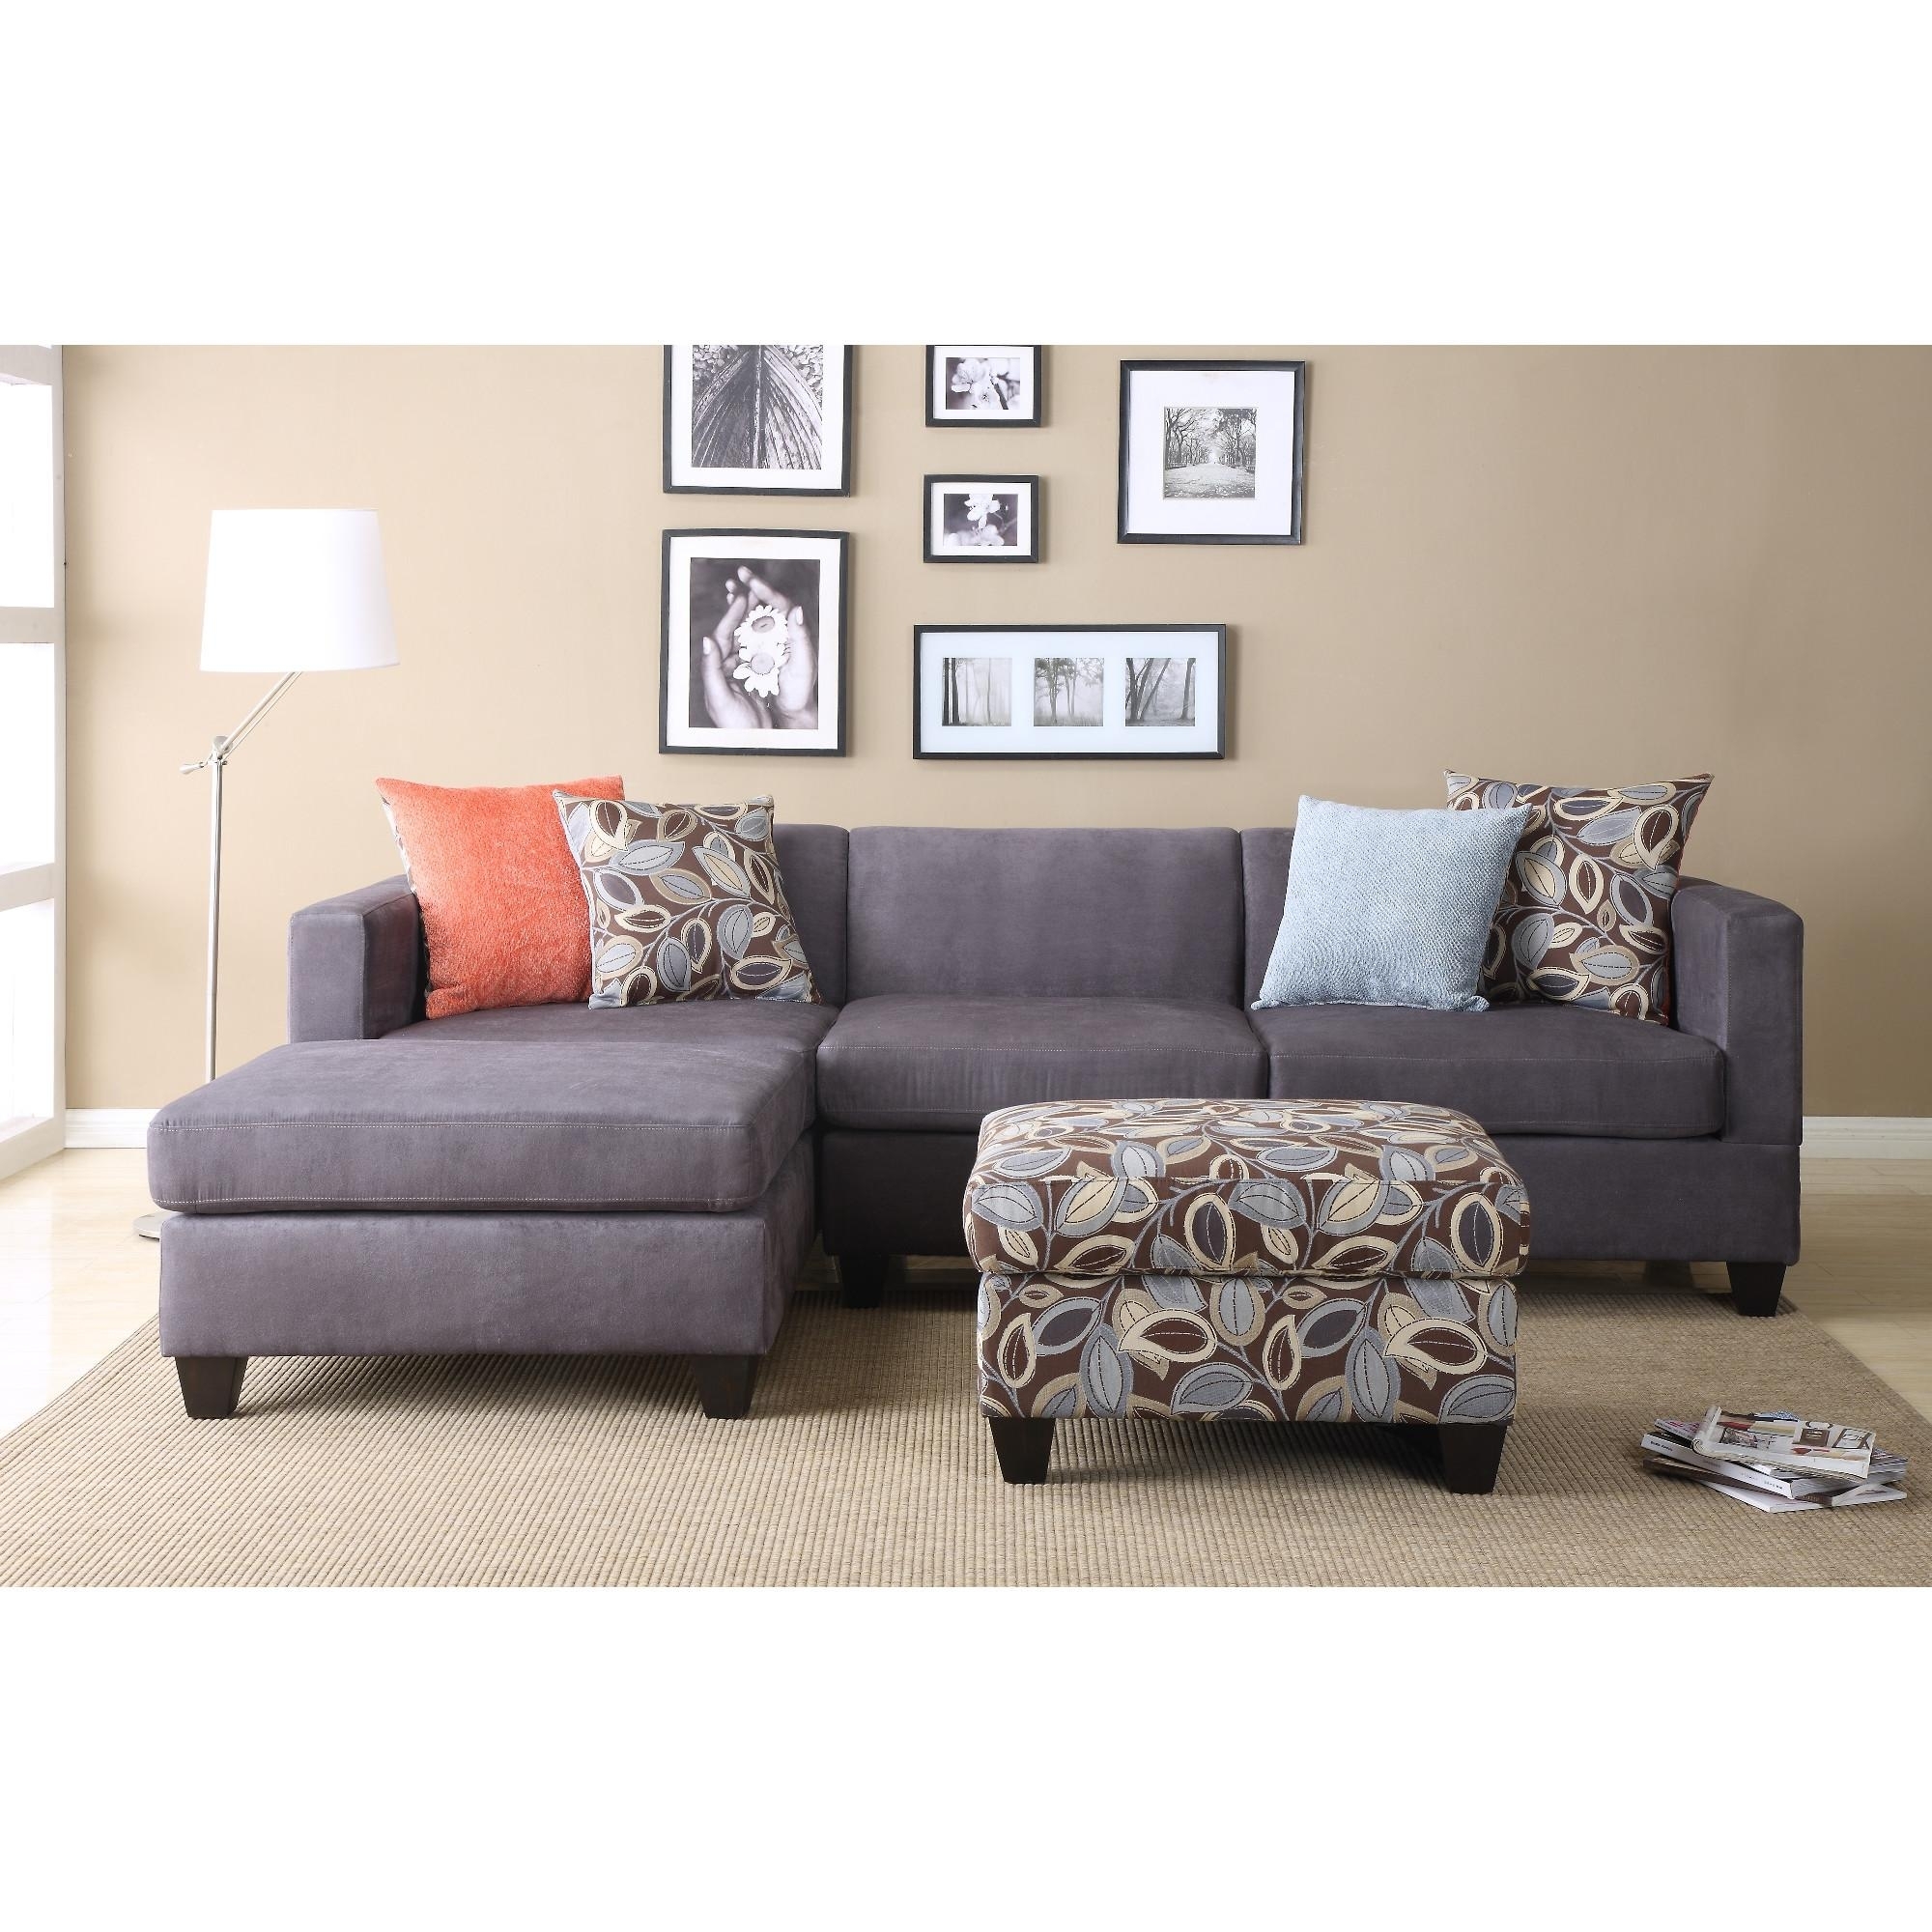 Poundex simplistic microfiber sectional with ottoman